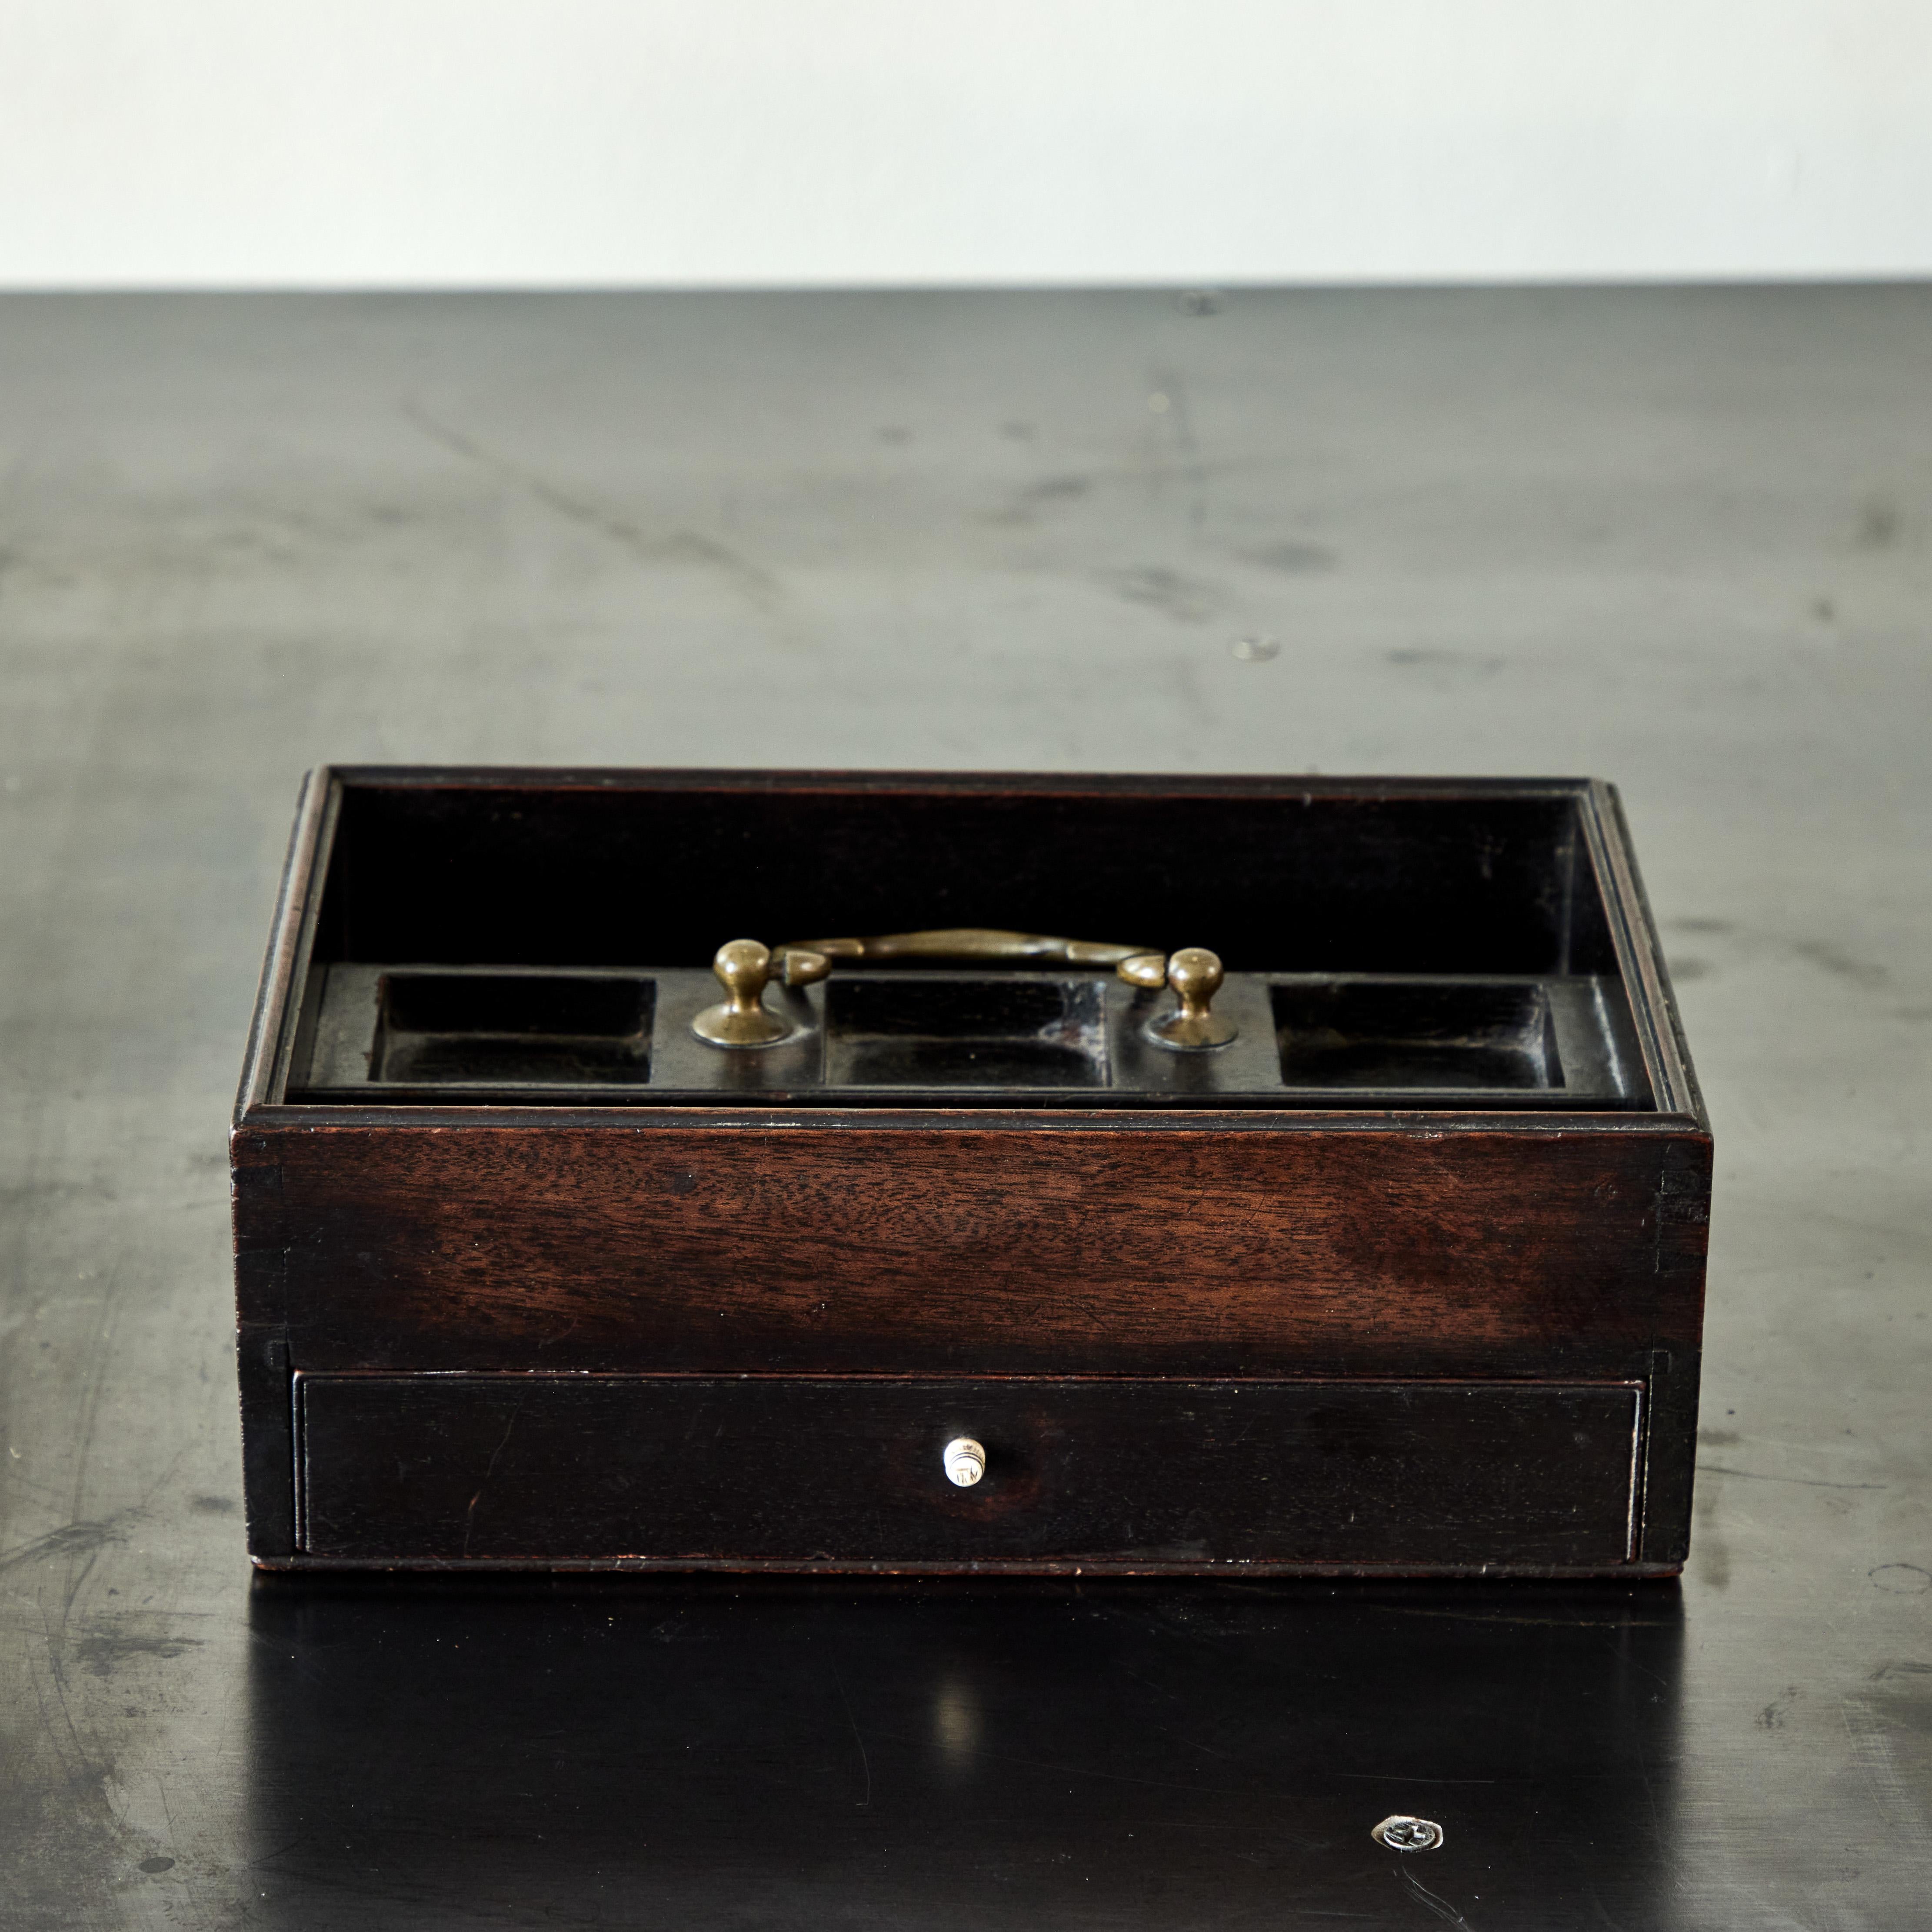 English early 19th-century dark wooden desk box. Featuring a thin wide drawer with bead-shaped brass pull, four upper compartments of various sizes and a U-shaped brass handle. A handsome and discreet form of storage and decorative